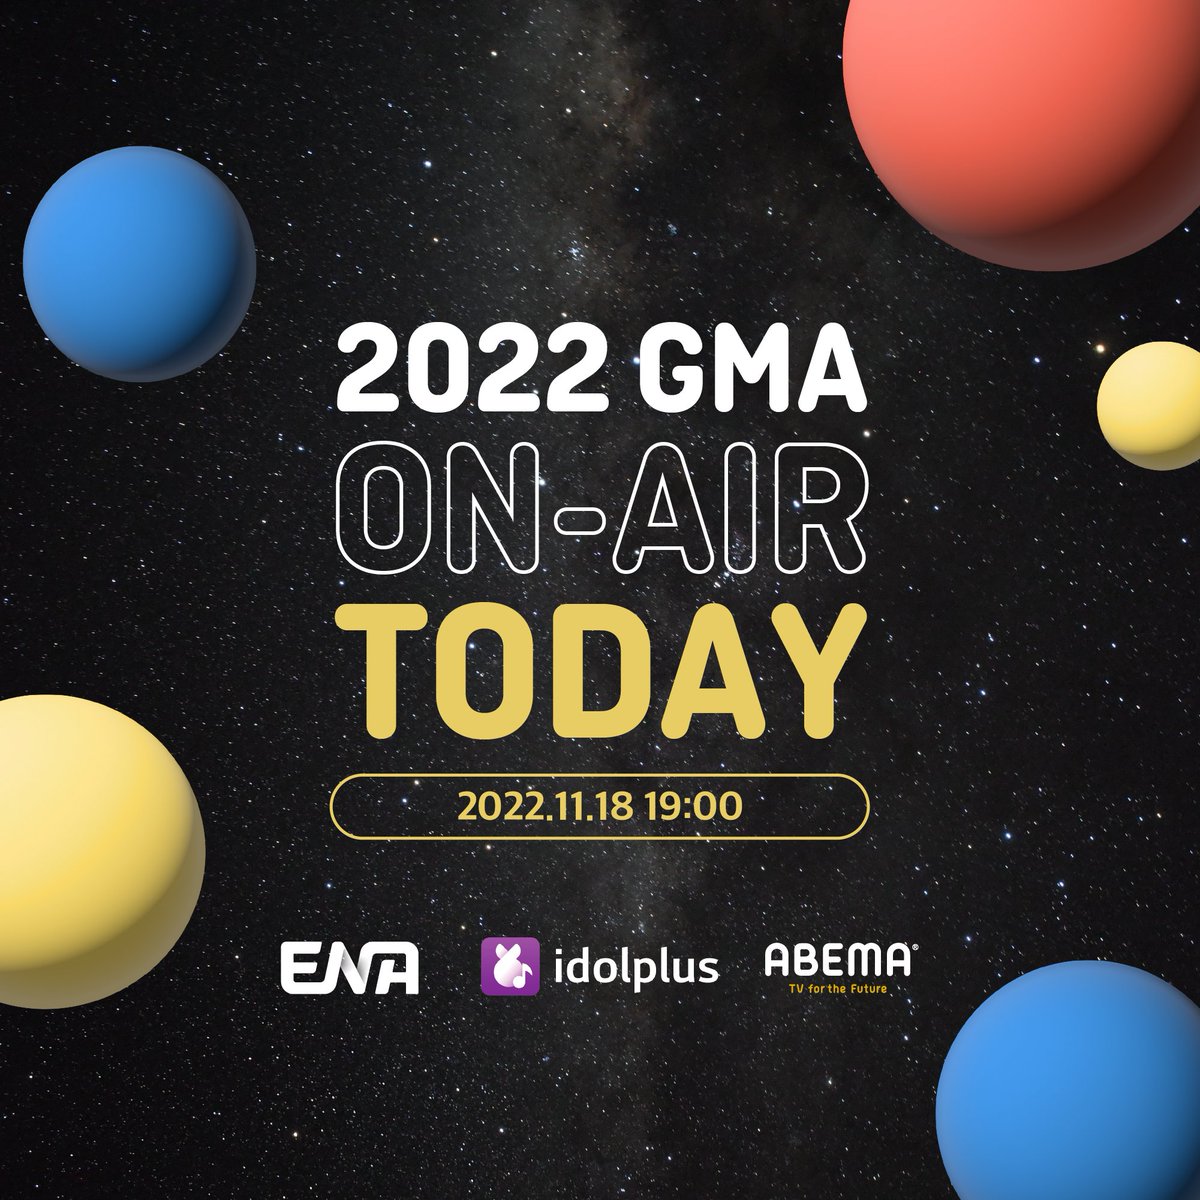 Finally, the 2022 GMA will on air tonight! Check out the available channels below 😘 📍 2022.11.18 19:00 📺 Domestic Broadcasting Channel 👉 ENA 💻 Online Domestic & Global 👉 Idol Plus 📡 Japan 👉 Abema TV